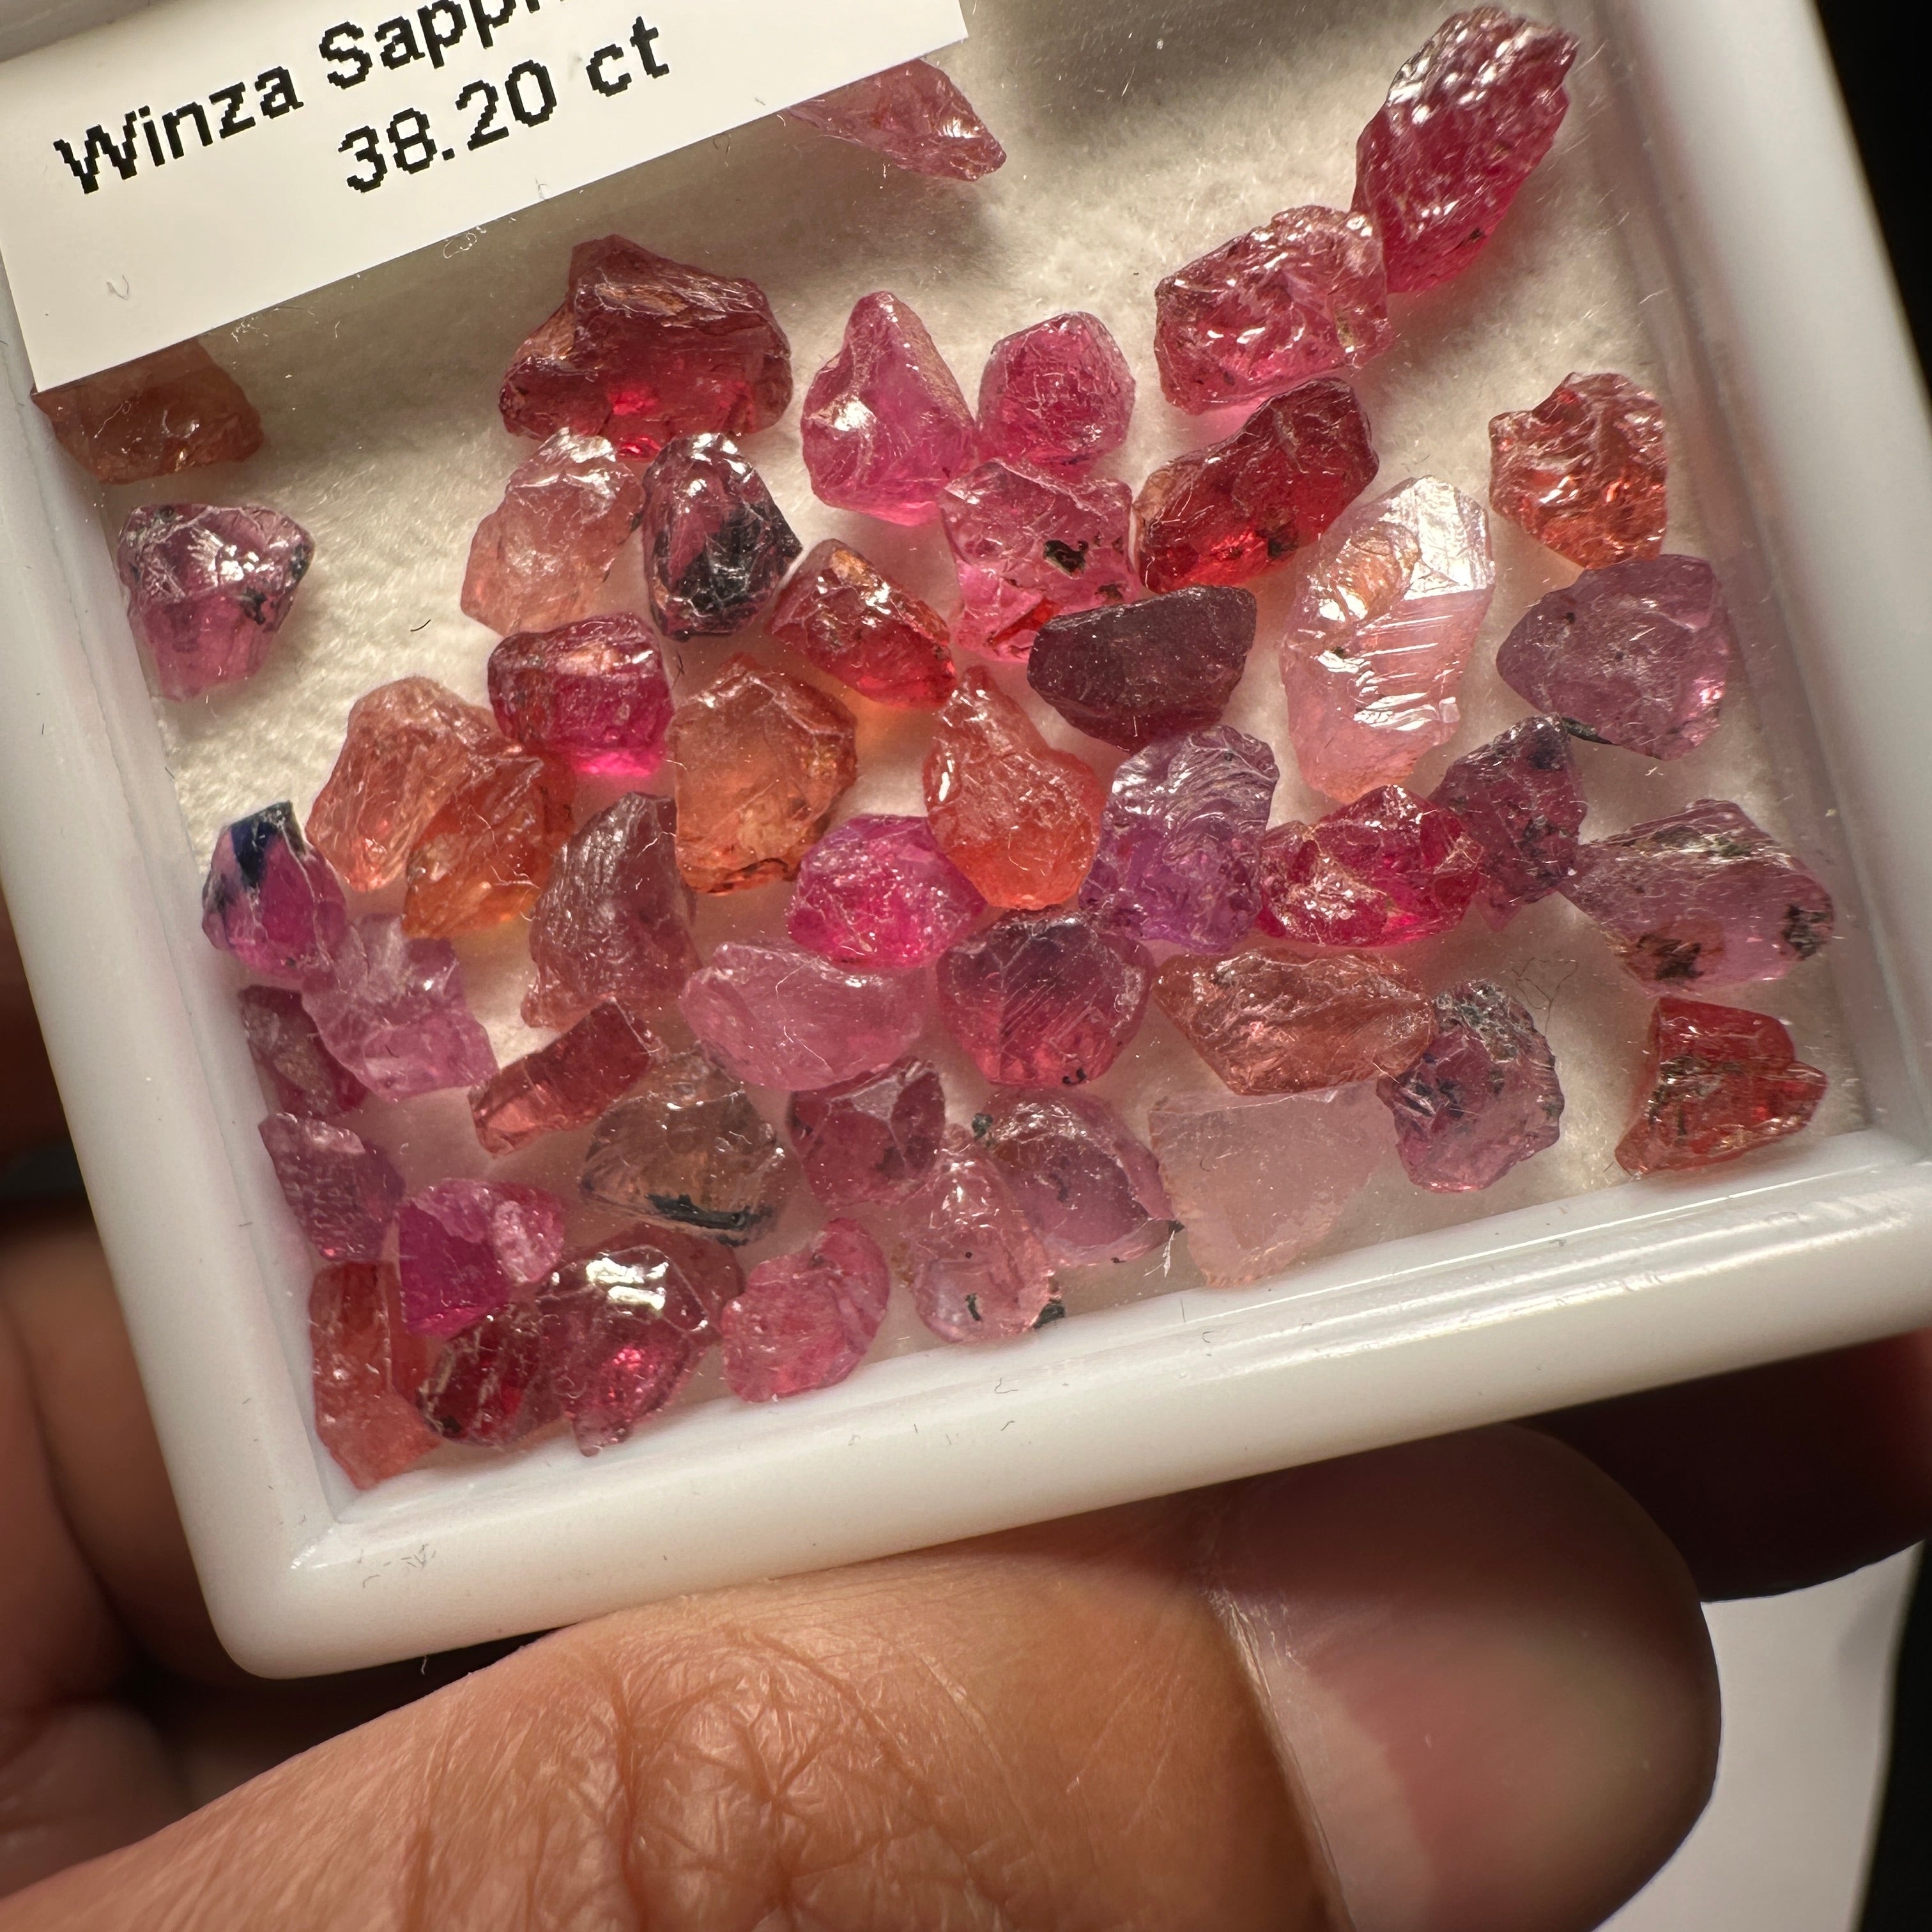 38.20ct Winza Sapphire Lot, Untreated Unheated, Melee Sizes, good for inlay, 0.4ct to 1ct sizes, most are 0.7ct